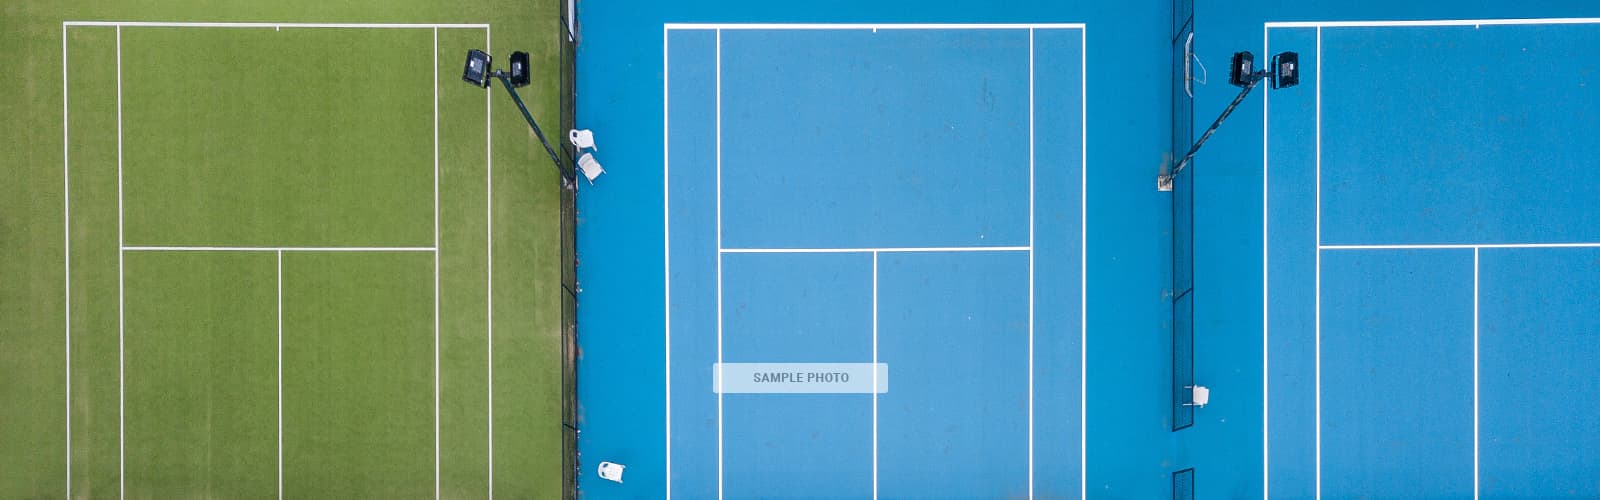 Randle High School Tennis Courts in Clodine Texas